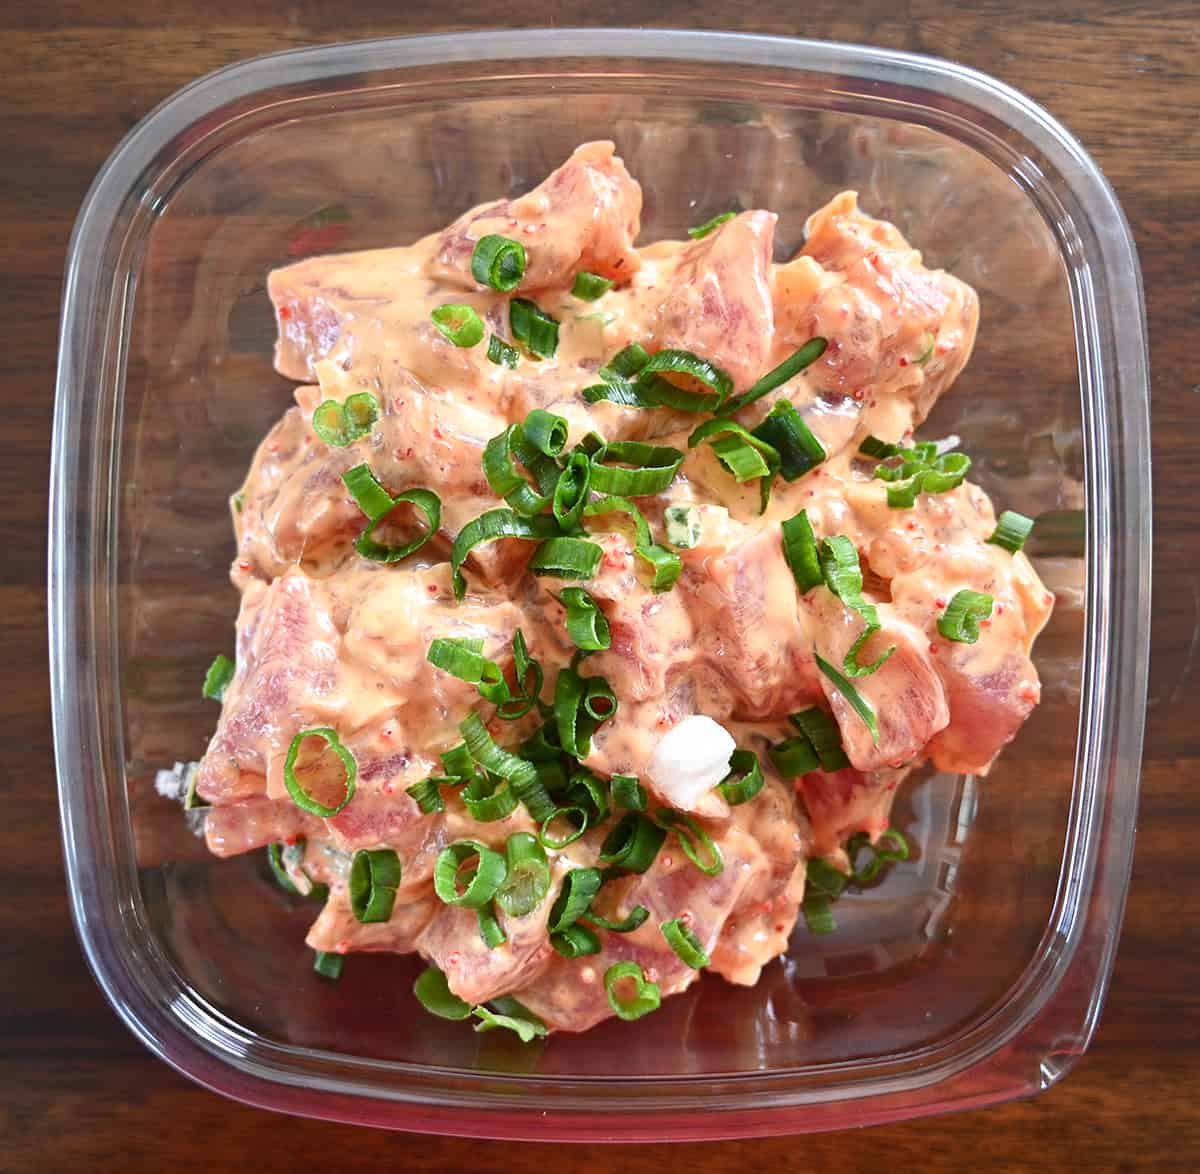 Top down image of an open container of the Spicy Ahi Poke. There are sesame seeds covering the poke.